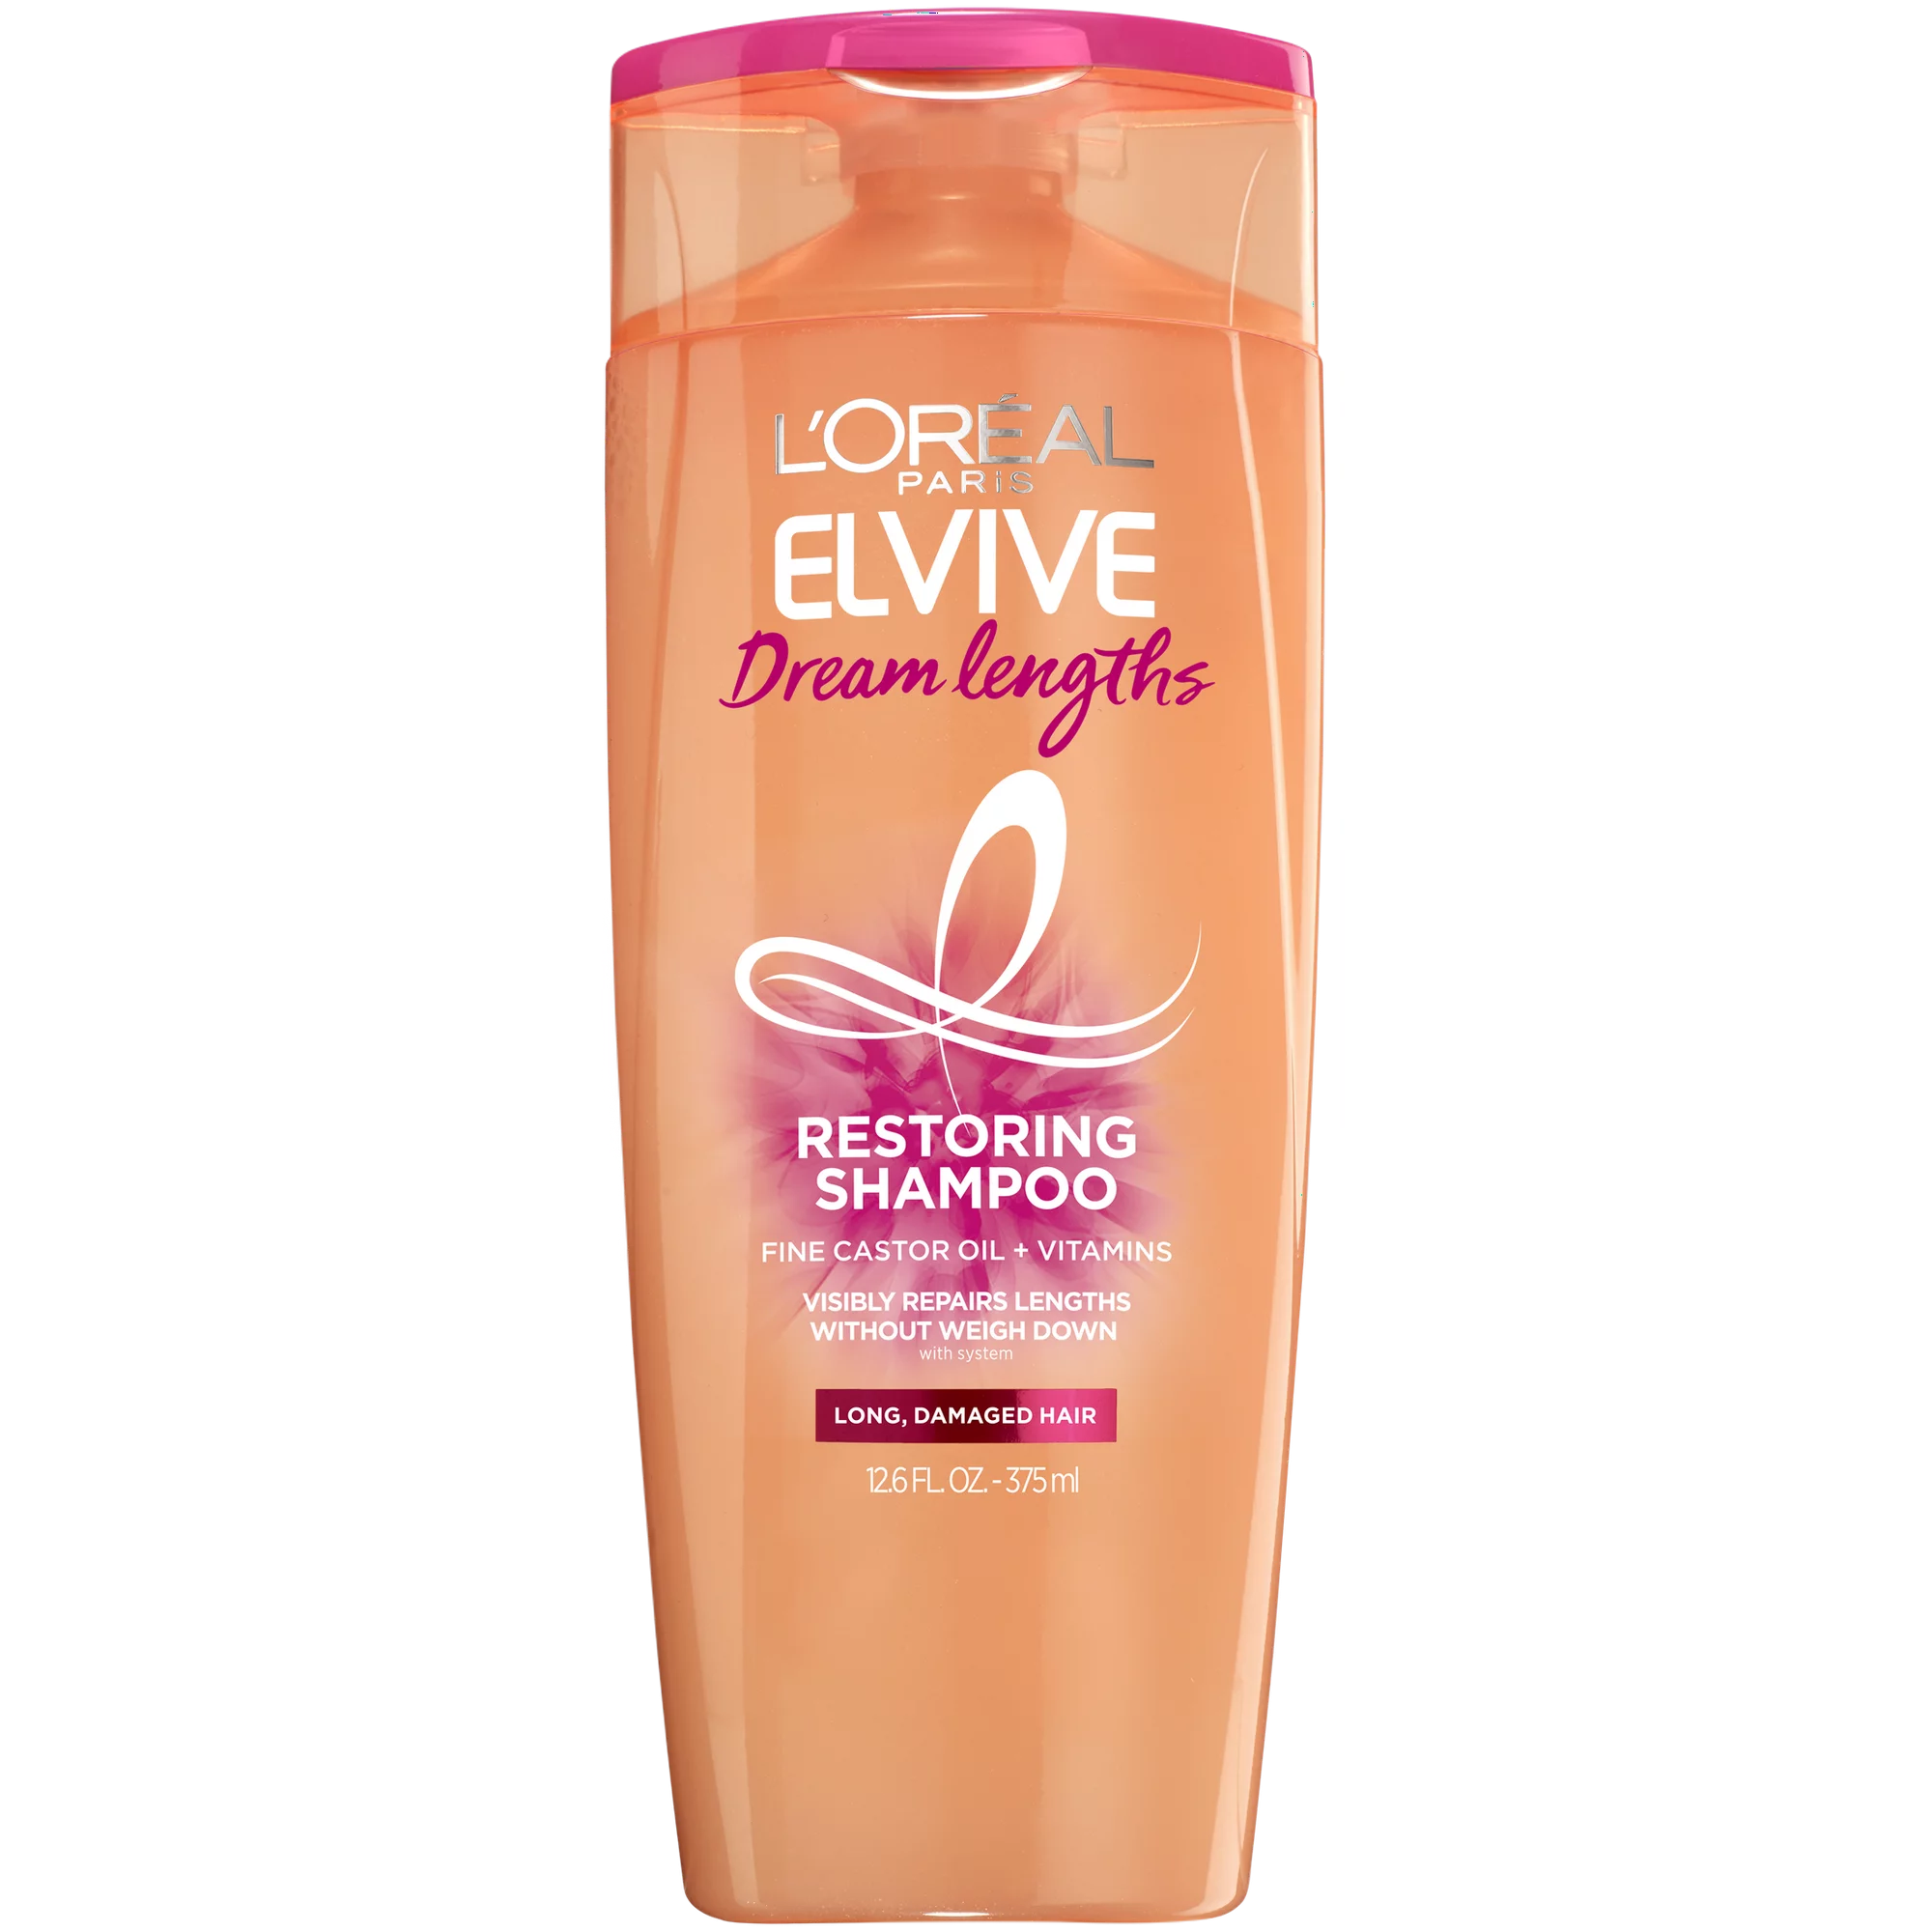 Revitalize your hair on any L'Oreal Paris Elvive products.